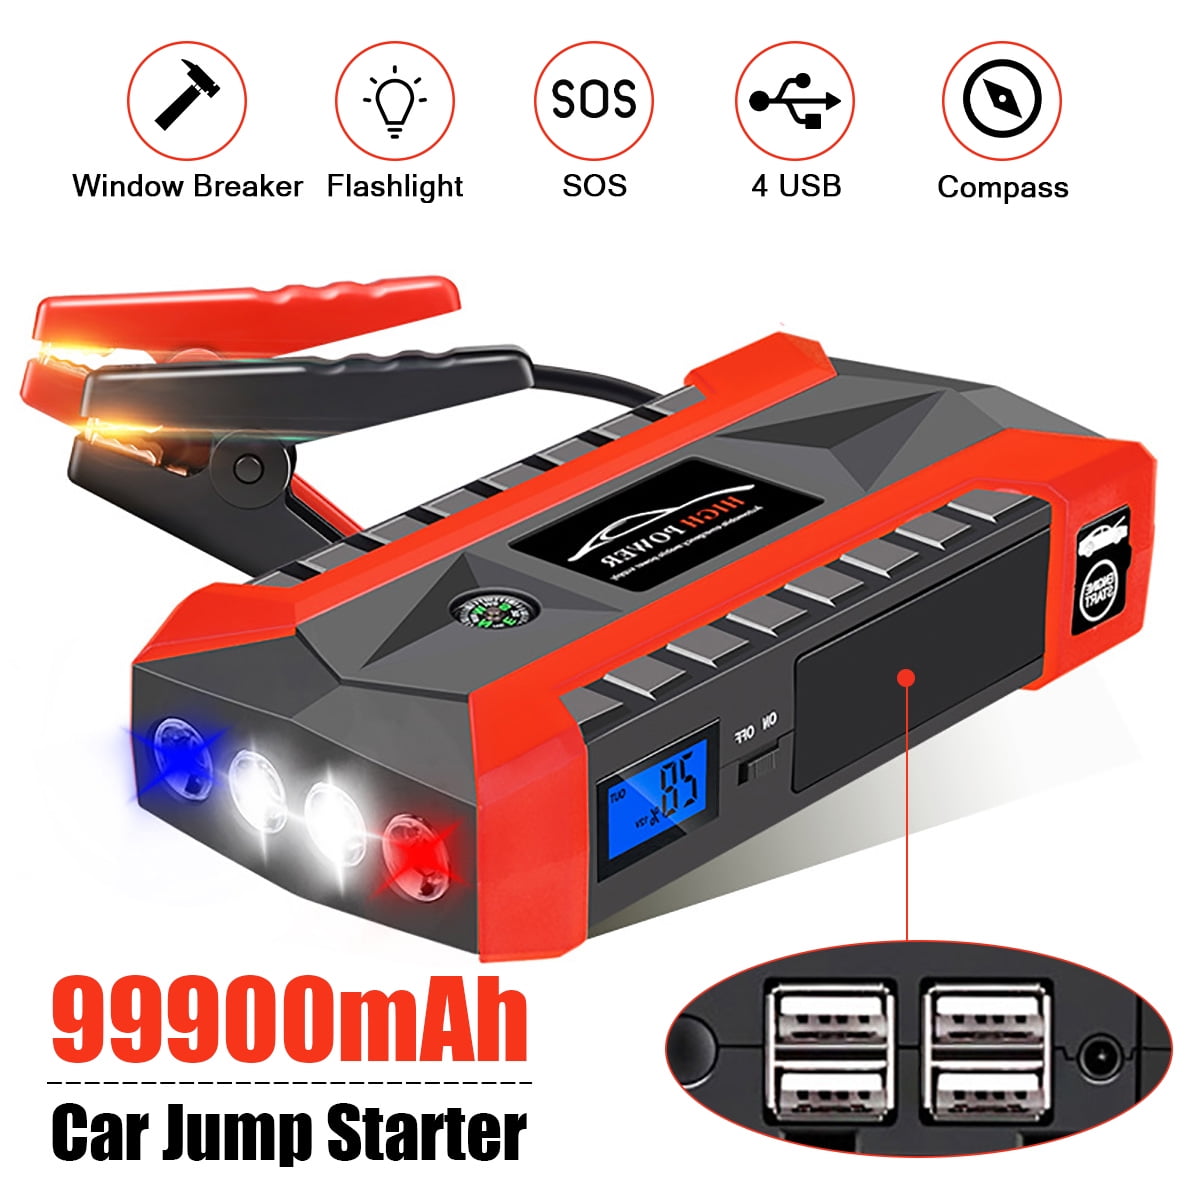 Up to 6.5L Gas, 5.5L Diesel Engine with USB Quick Charge,JX29,A Car Jump Starters Portable Waterproof Car Battery Power Bank